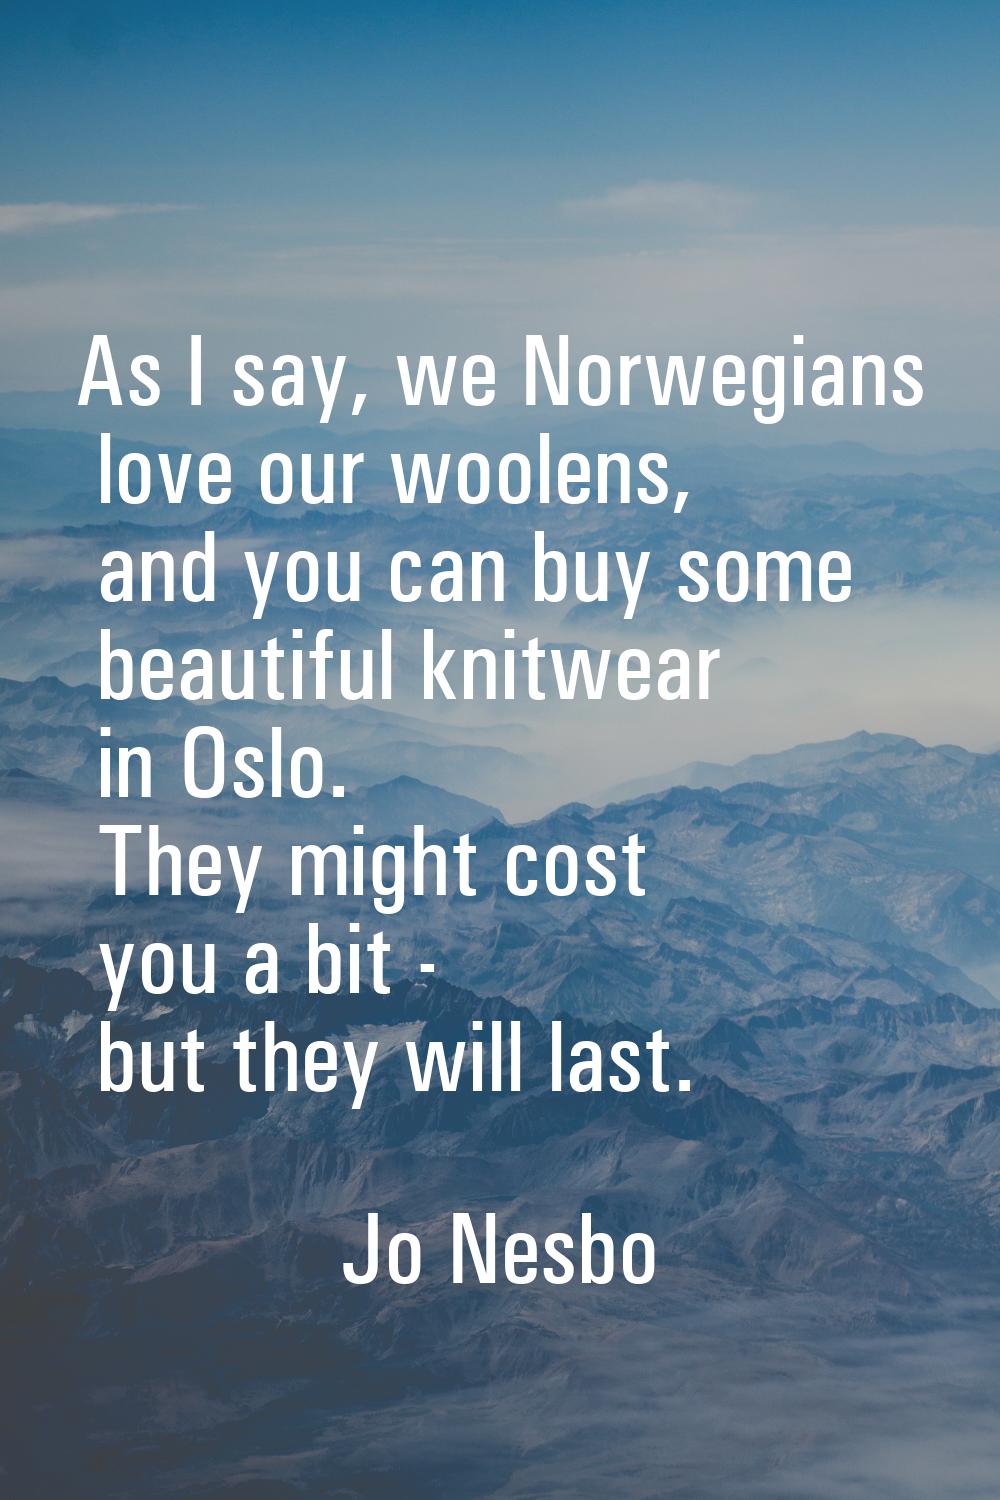 As I say, we Norwegians love our woolens, and you can buy some beautiful knitwear in Oslo. They mig